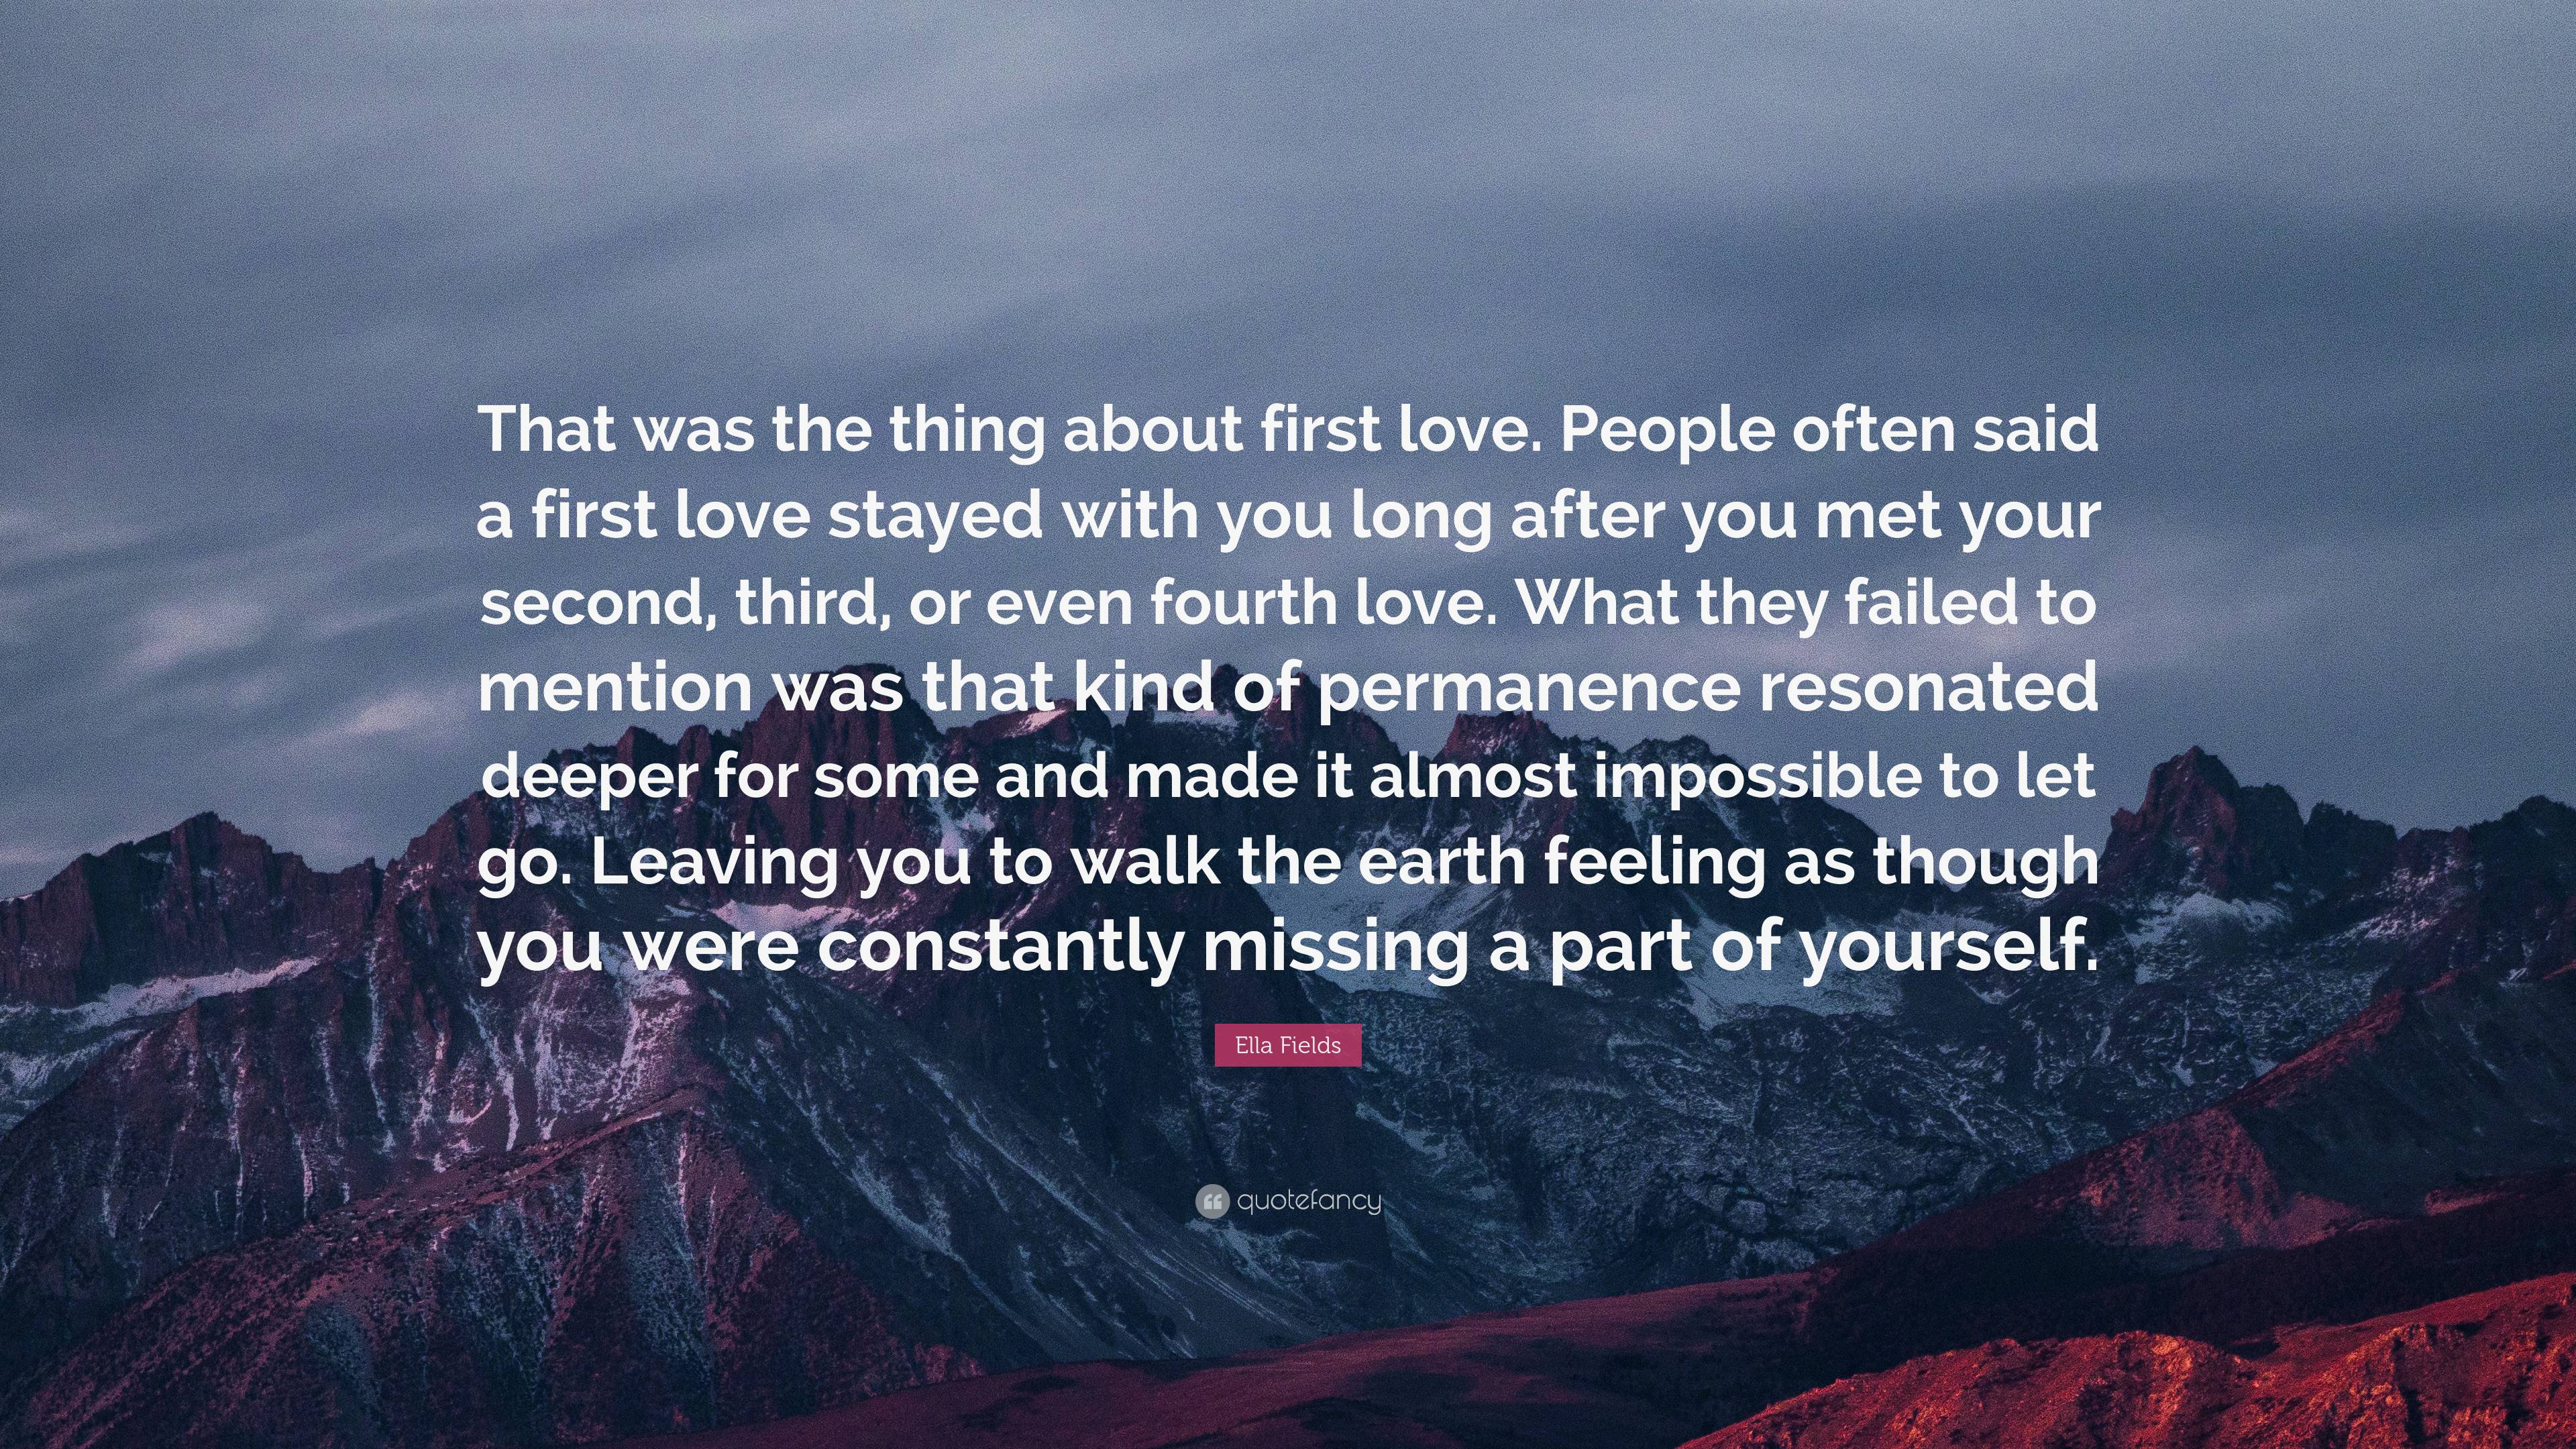 Ella Fields Quote: “That was the thing about first love. People often ...